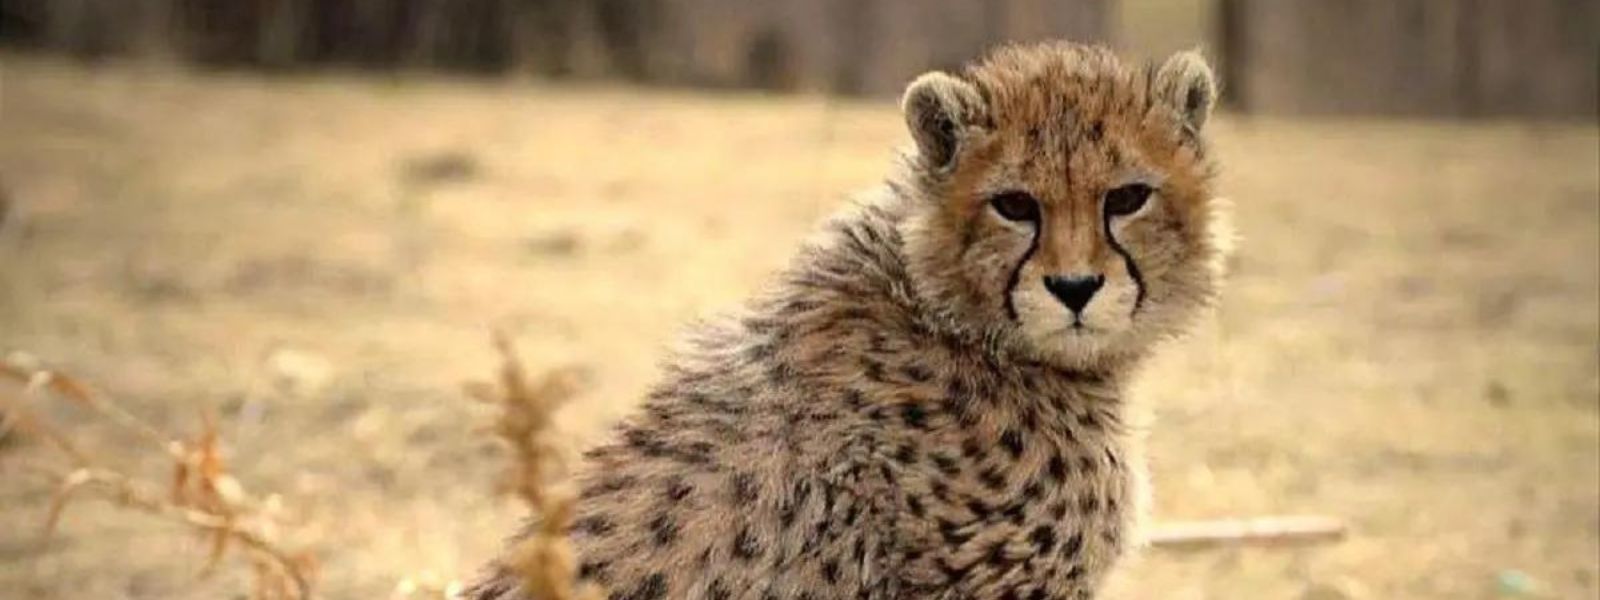 Iran mourns death of Pirouz, rare Asiatic Cheetah cub who became a symbol for anti-govt protesters